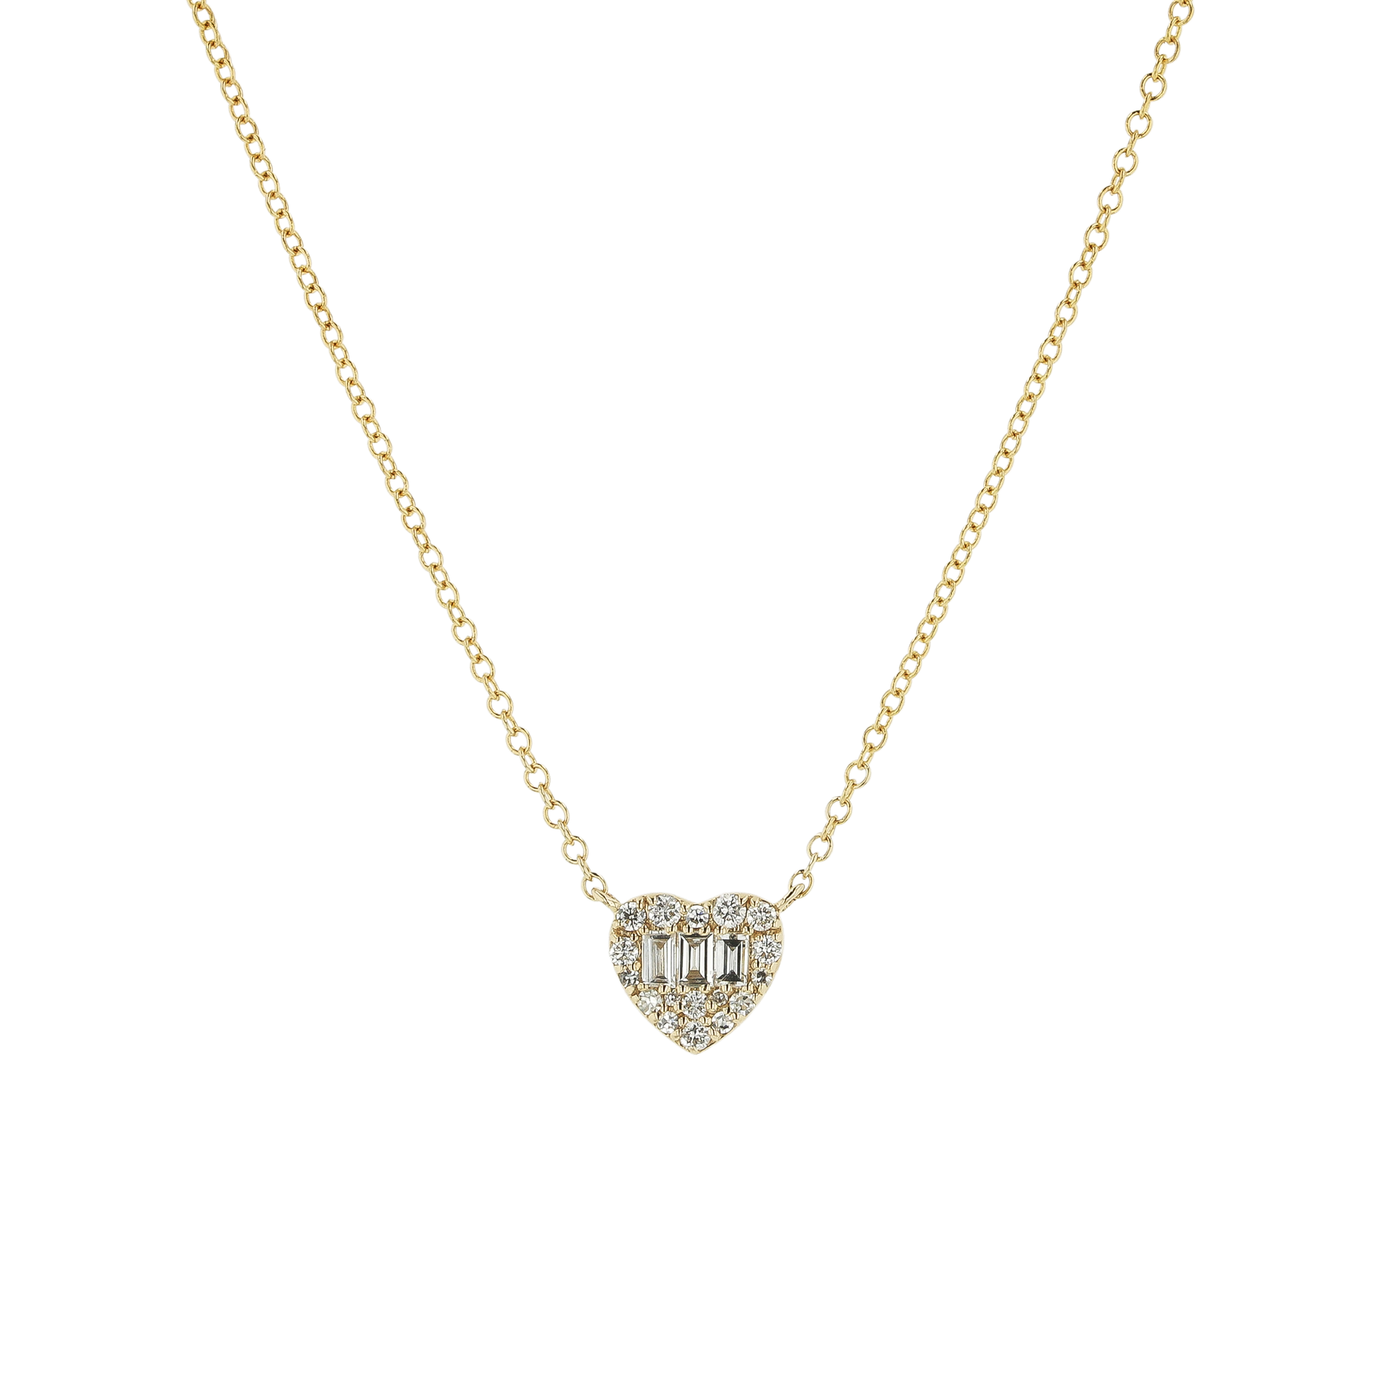 "Timeless Heart Pendant" 0.19 CTTW Diamond Pendant Necklace in 14K Yellow Gold